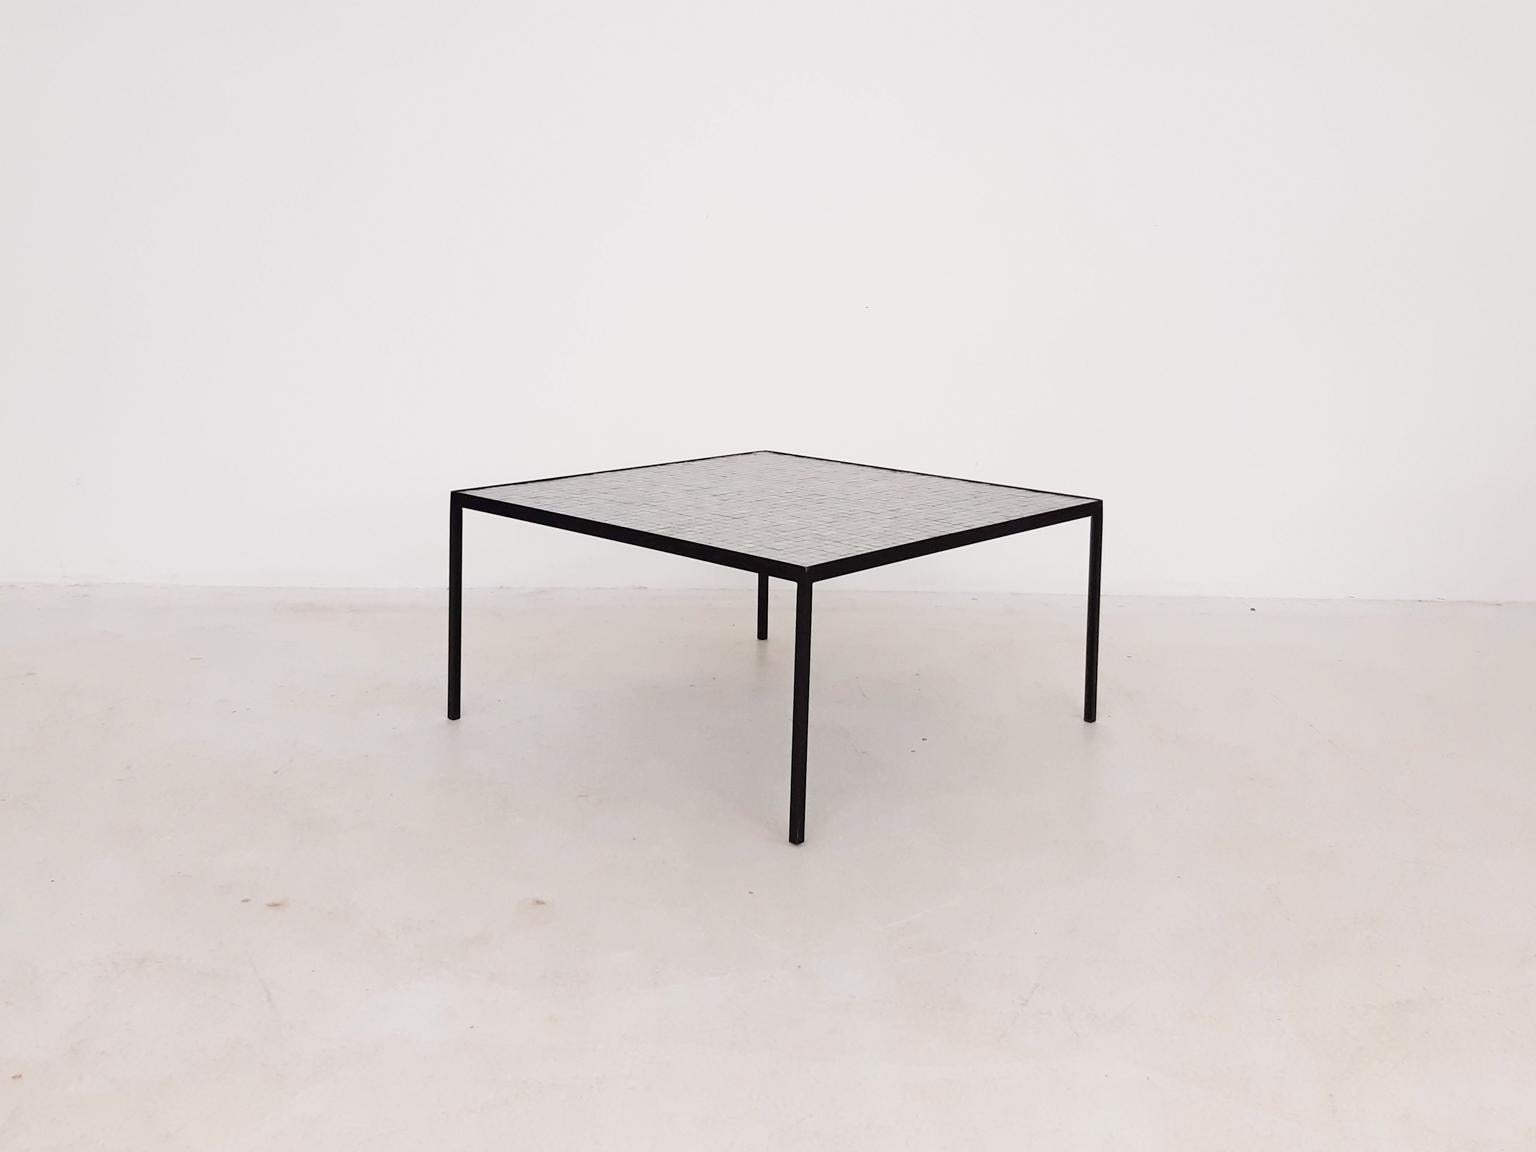 Stunning minimalistic Dutch midcentury coffee table with a black metal frame and a beautiful white mosaic top, which is made by hand.

It has many resemblances with the coffee table by the Dutch Floris Fiedeldij for Artimeta. The sizes and shapes